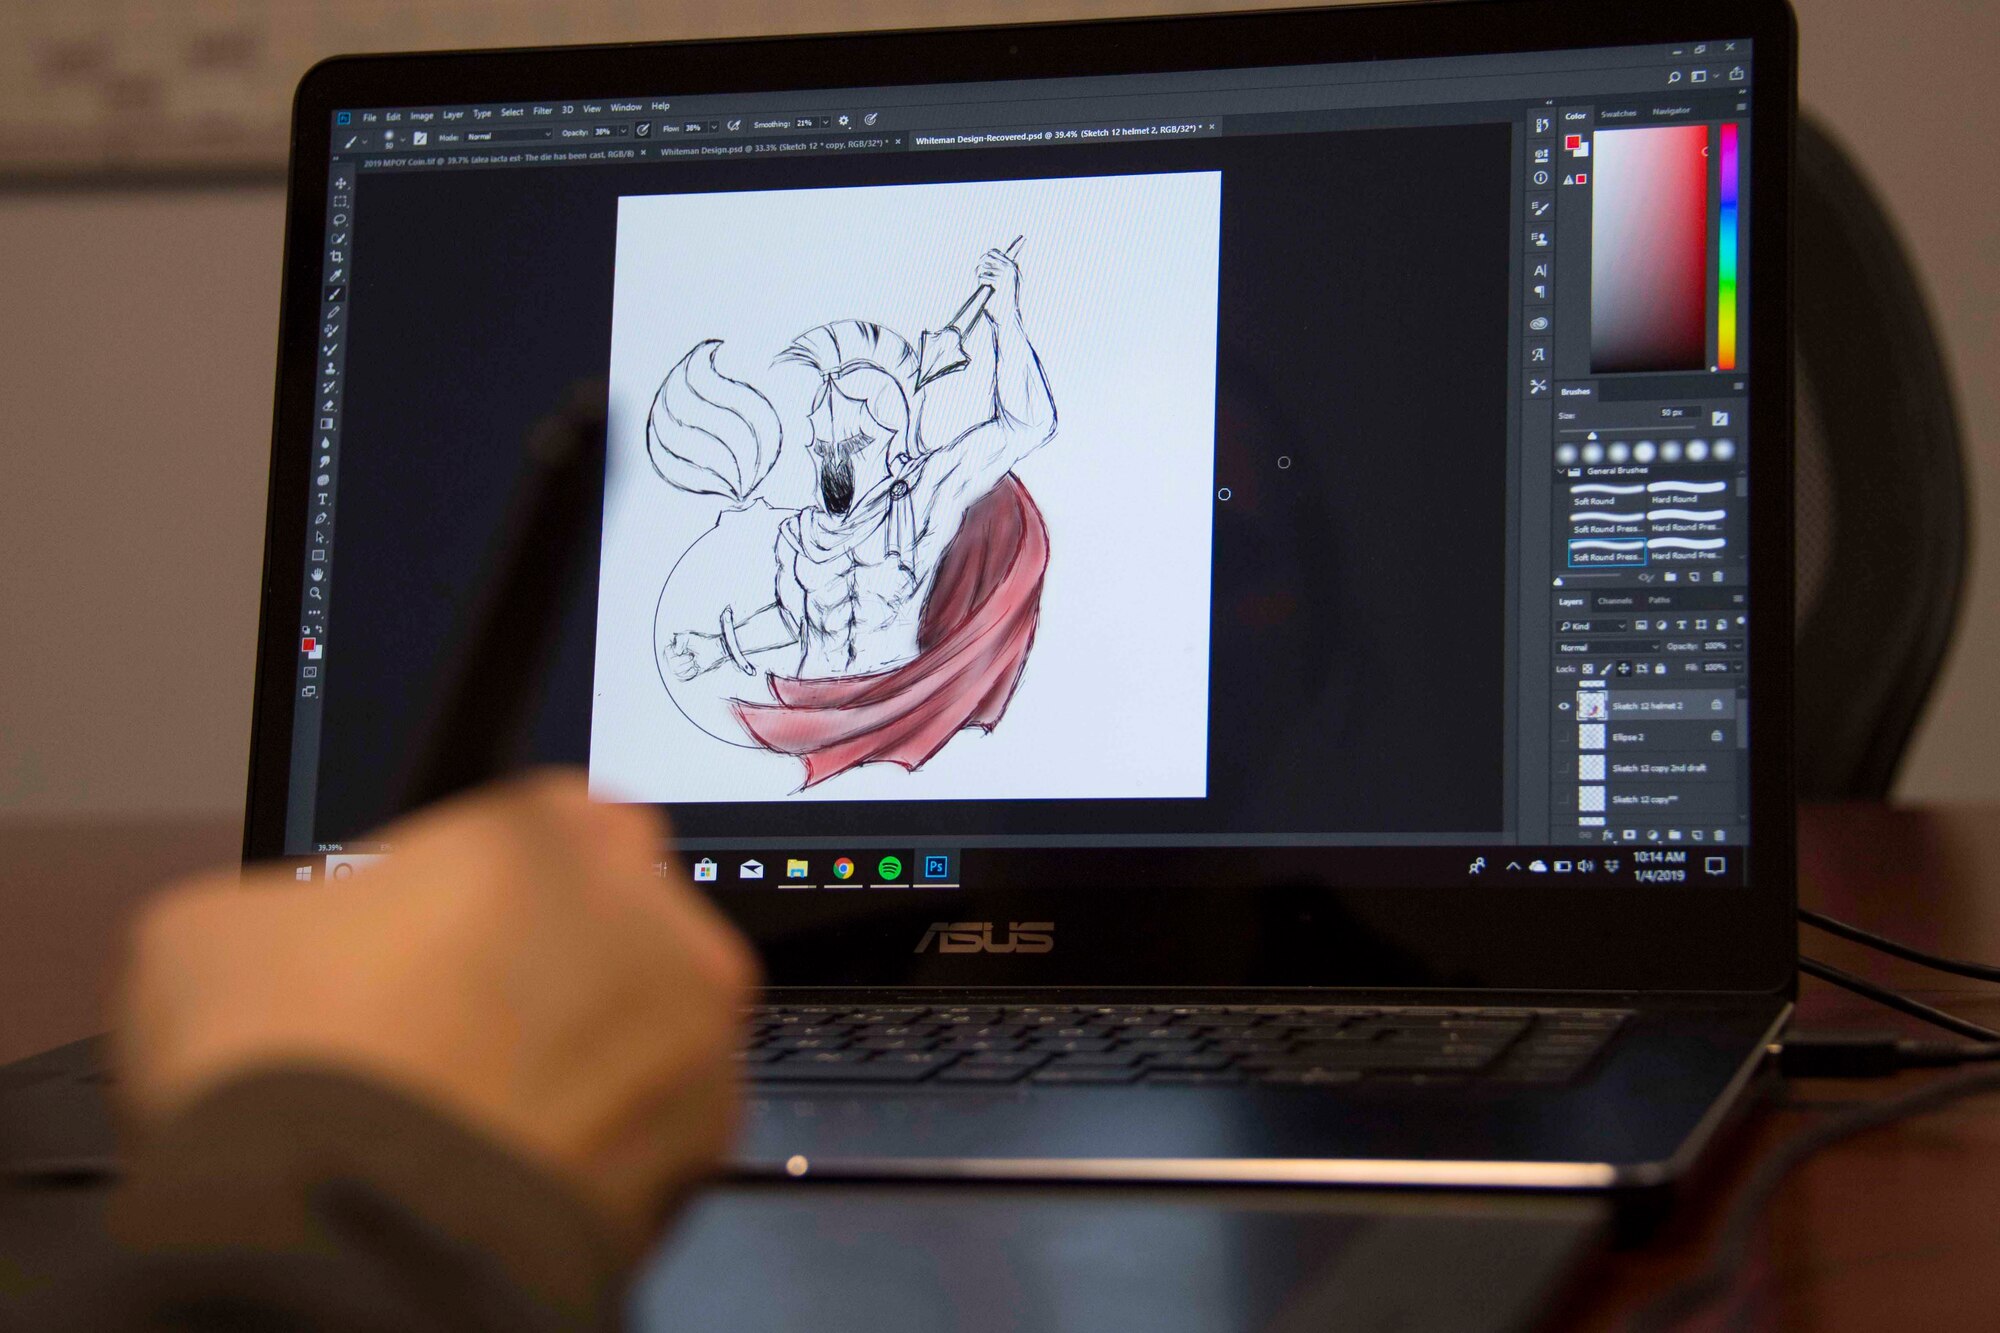 U.S. Air Force Sgt. Ashley Johnson, 707th Maintenance Squadron munitions technician, works on a mascot design at Barksdale Air Force Base, La., Dec. 4, 2019.   A trained artist, Johnson has created mascot designs for many Air Force units, including this one for a group at Whitman AFB. (U.S. Air Force  photo by Master Sgt. Ted Daigle)